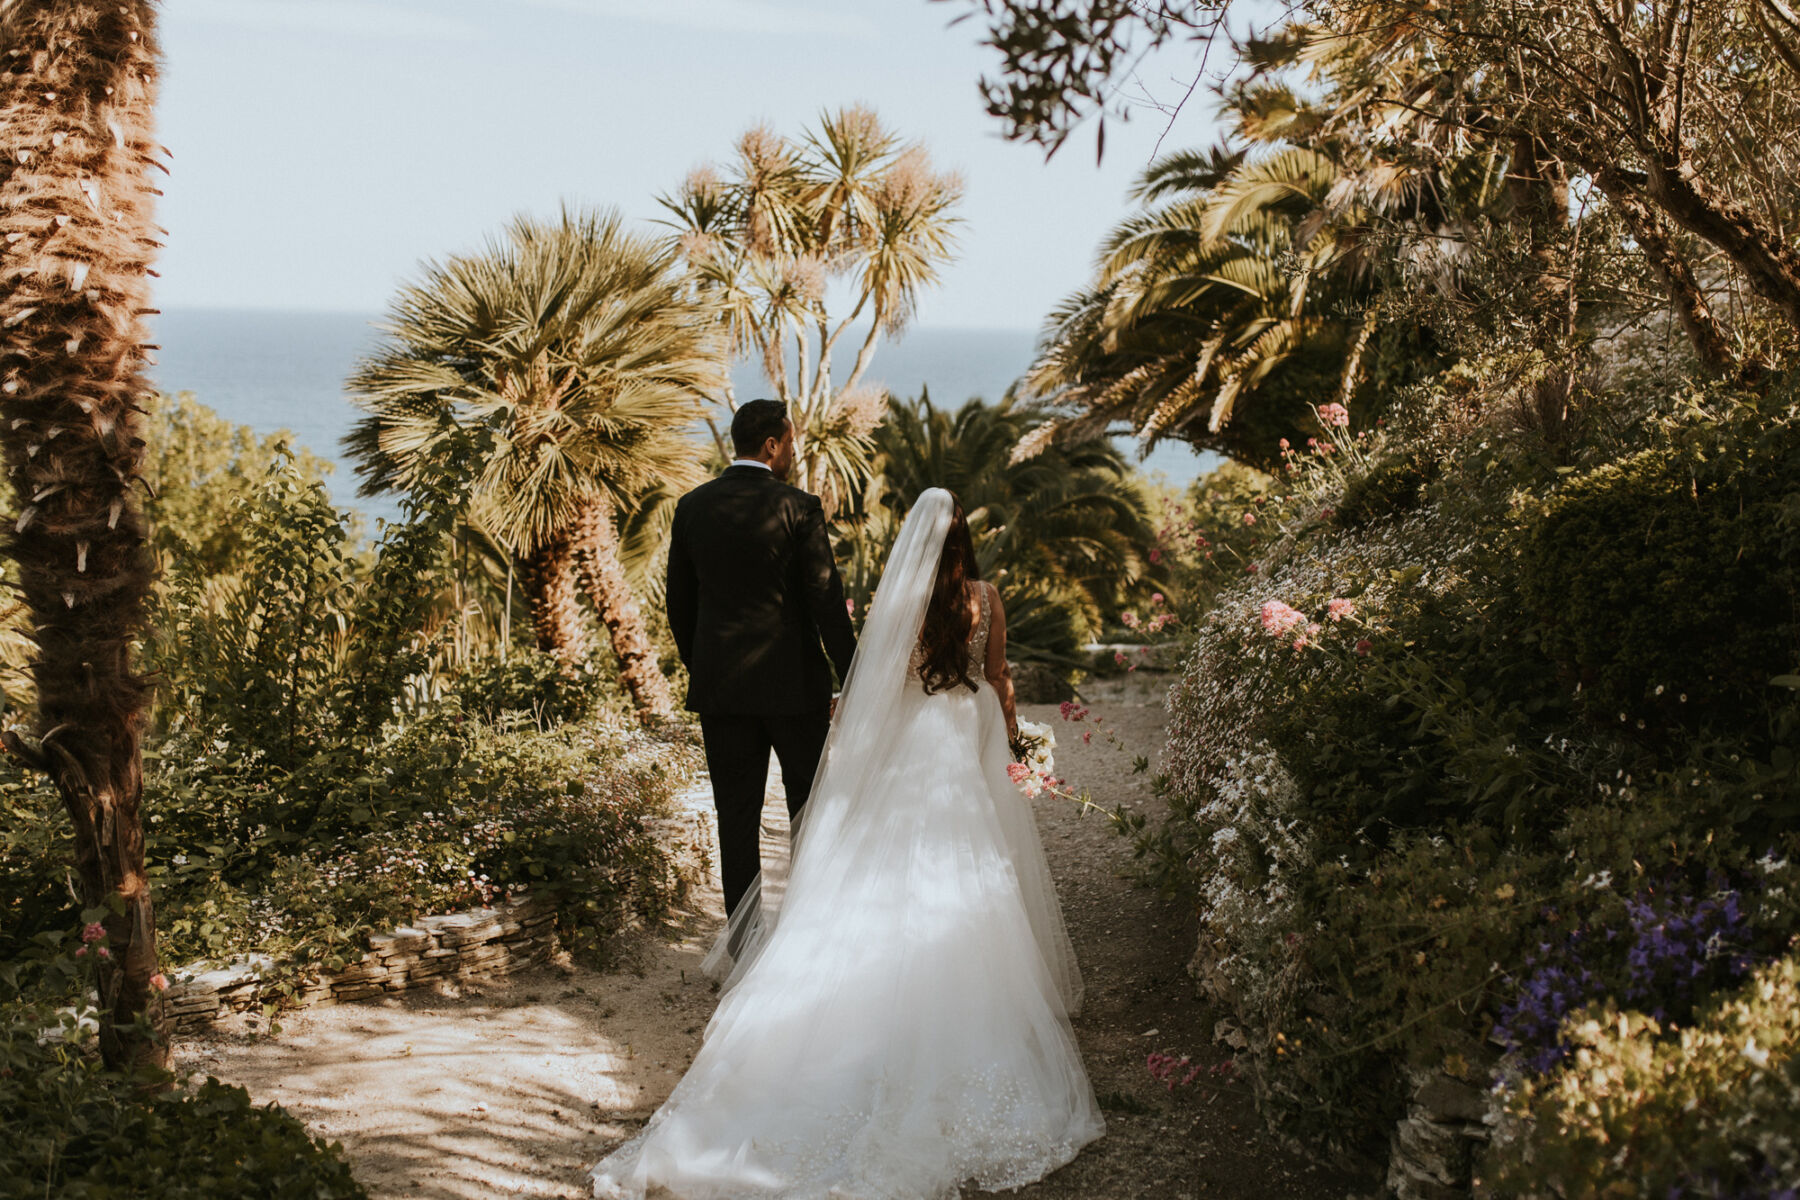 Bride and groom walking down a path surrounded by palm trees at The Pennsylvania Castle Estate - a Dorset wedding venue on a clifftop with incredible sea views.